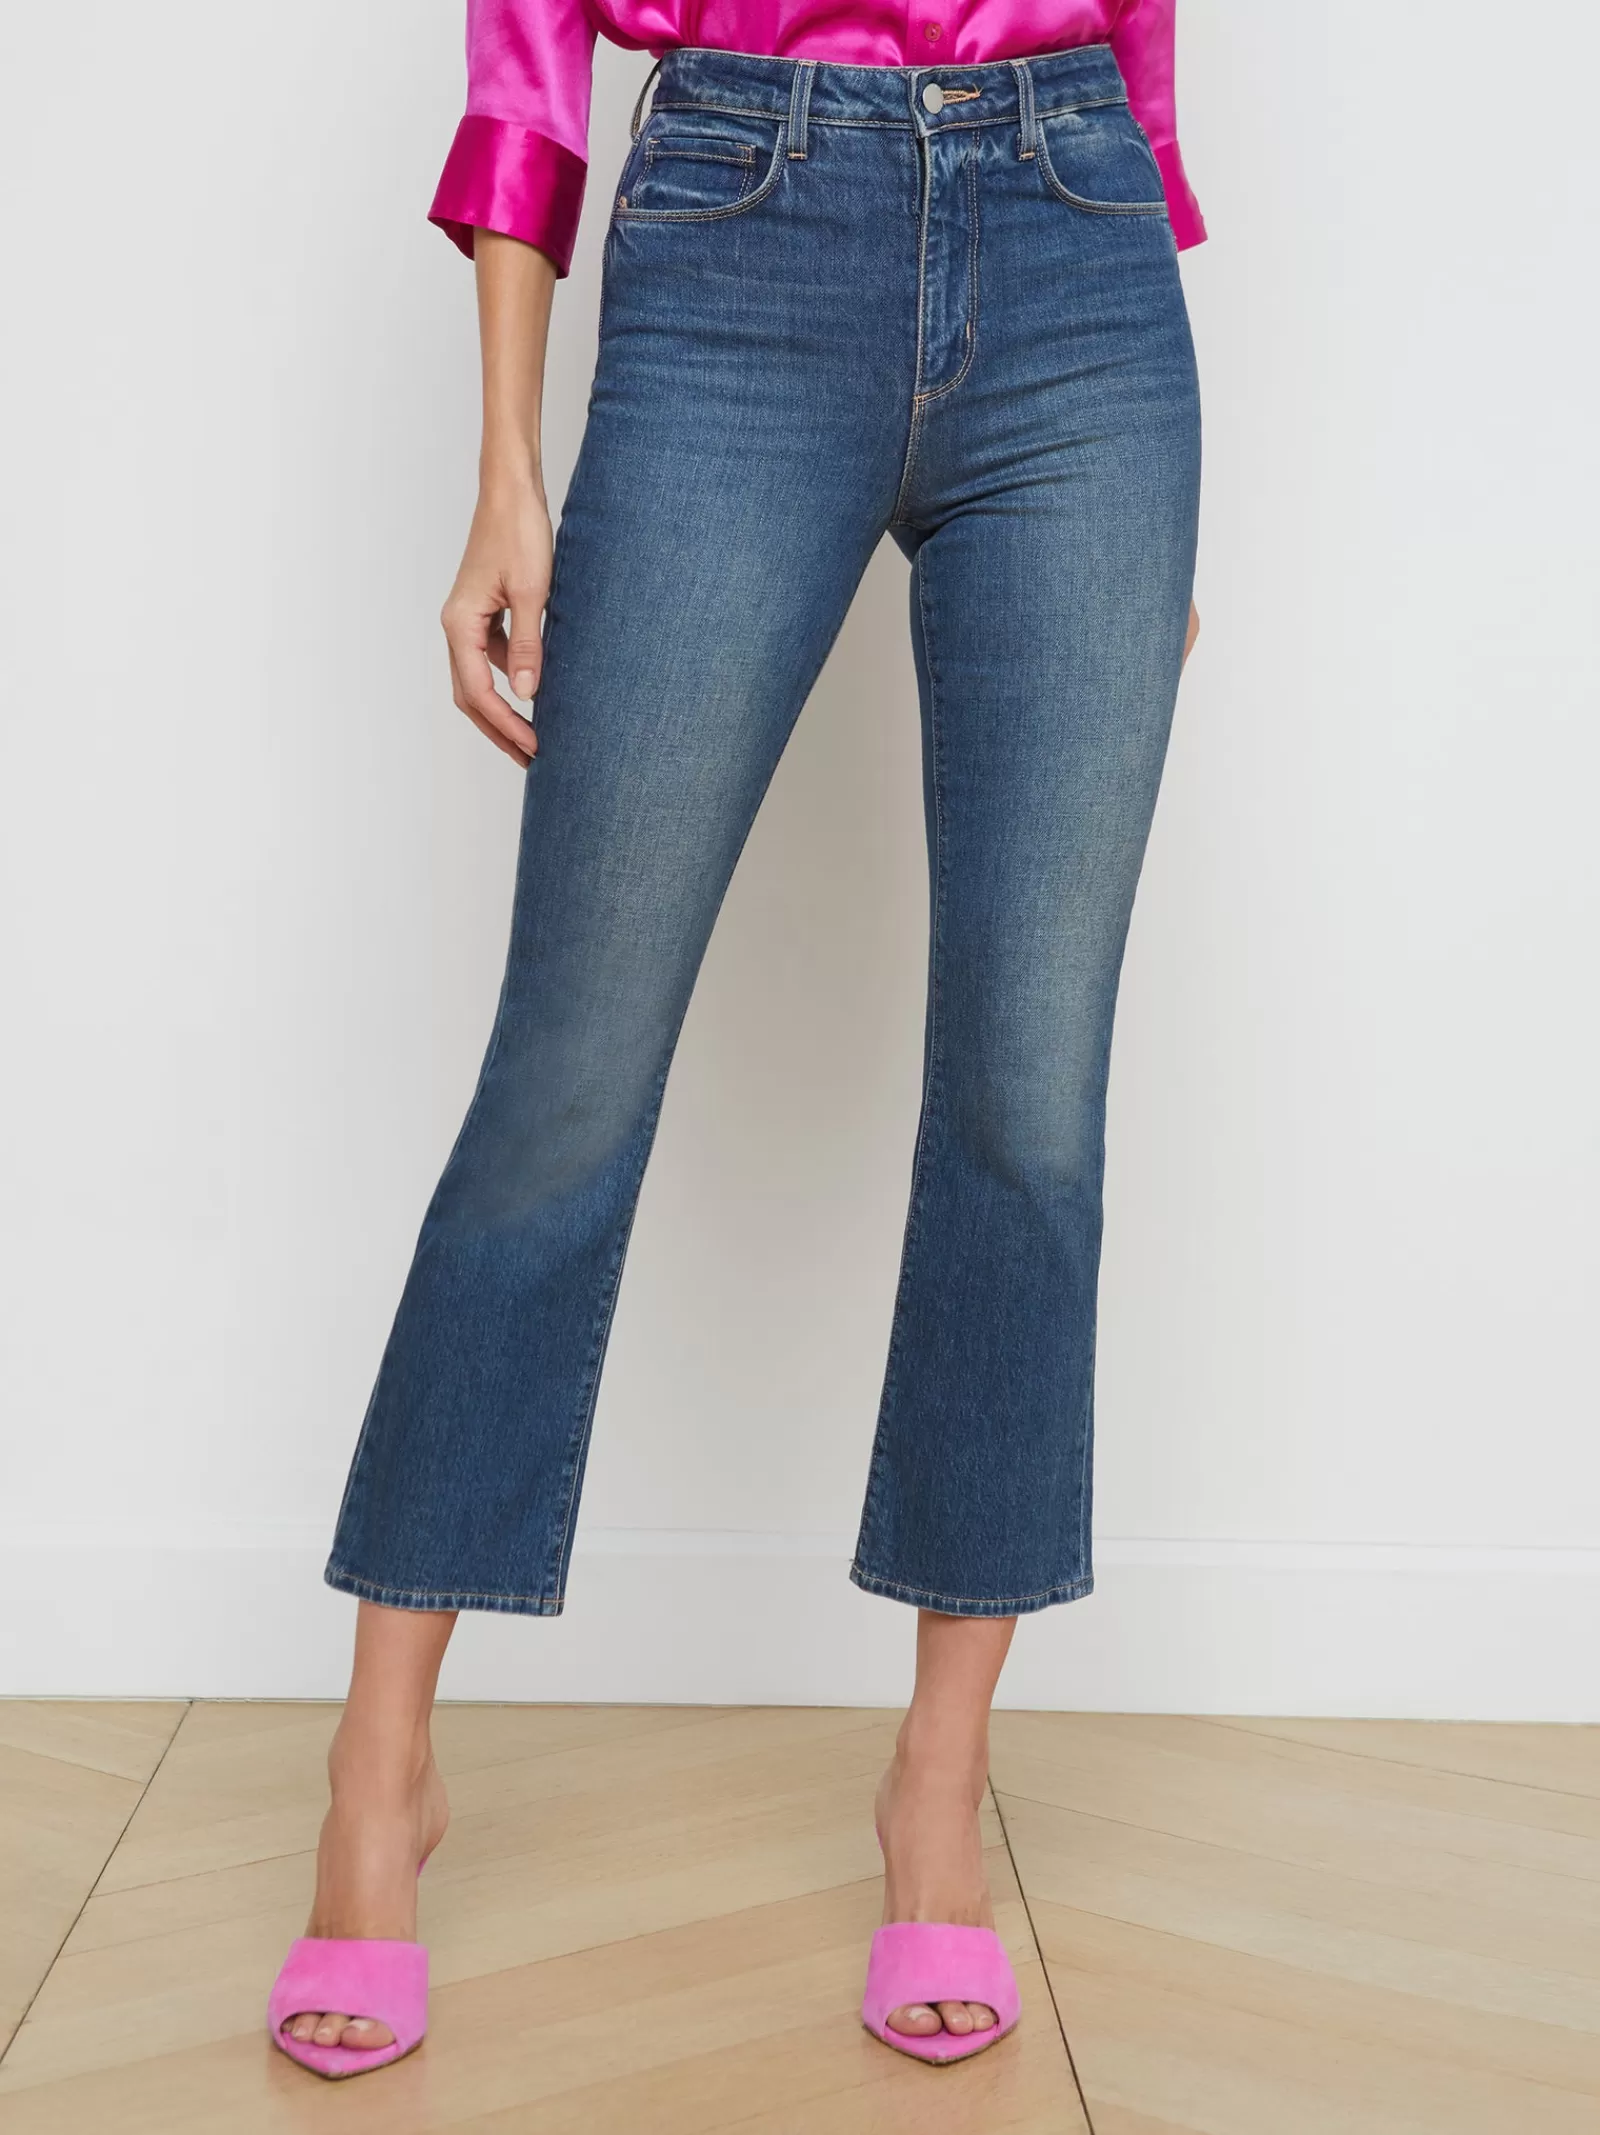 L'AGENCE Mira Cropped Micro Boot Jean< Flare & Bootcut | Best Sellers